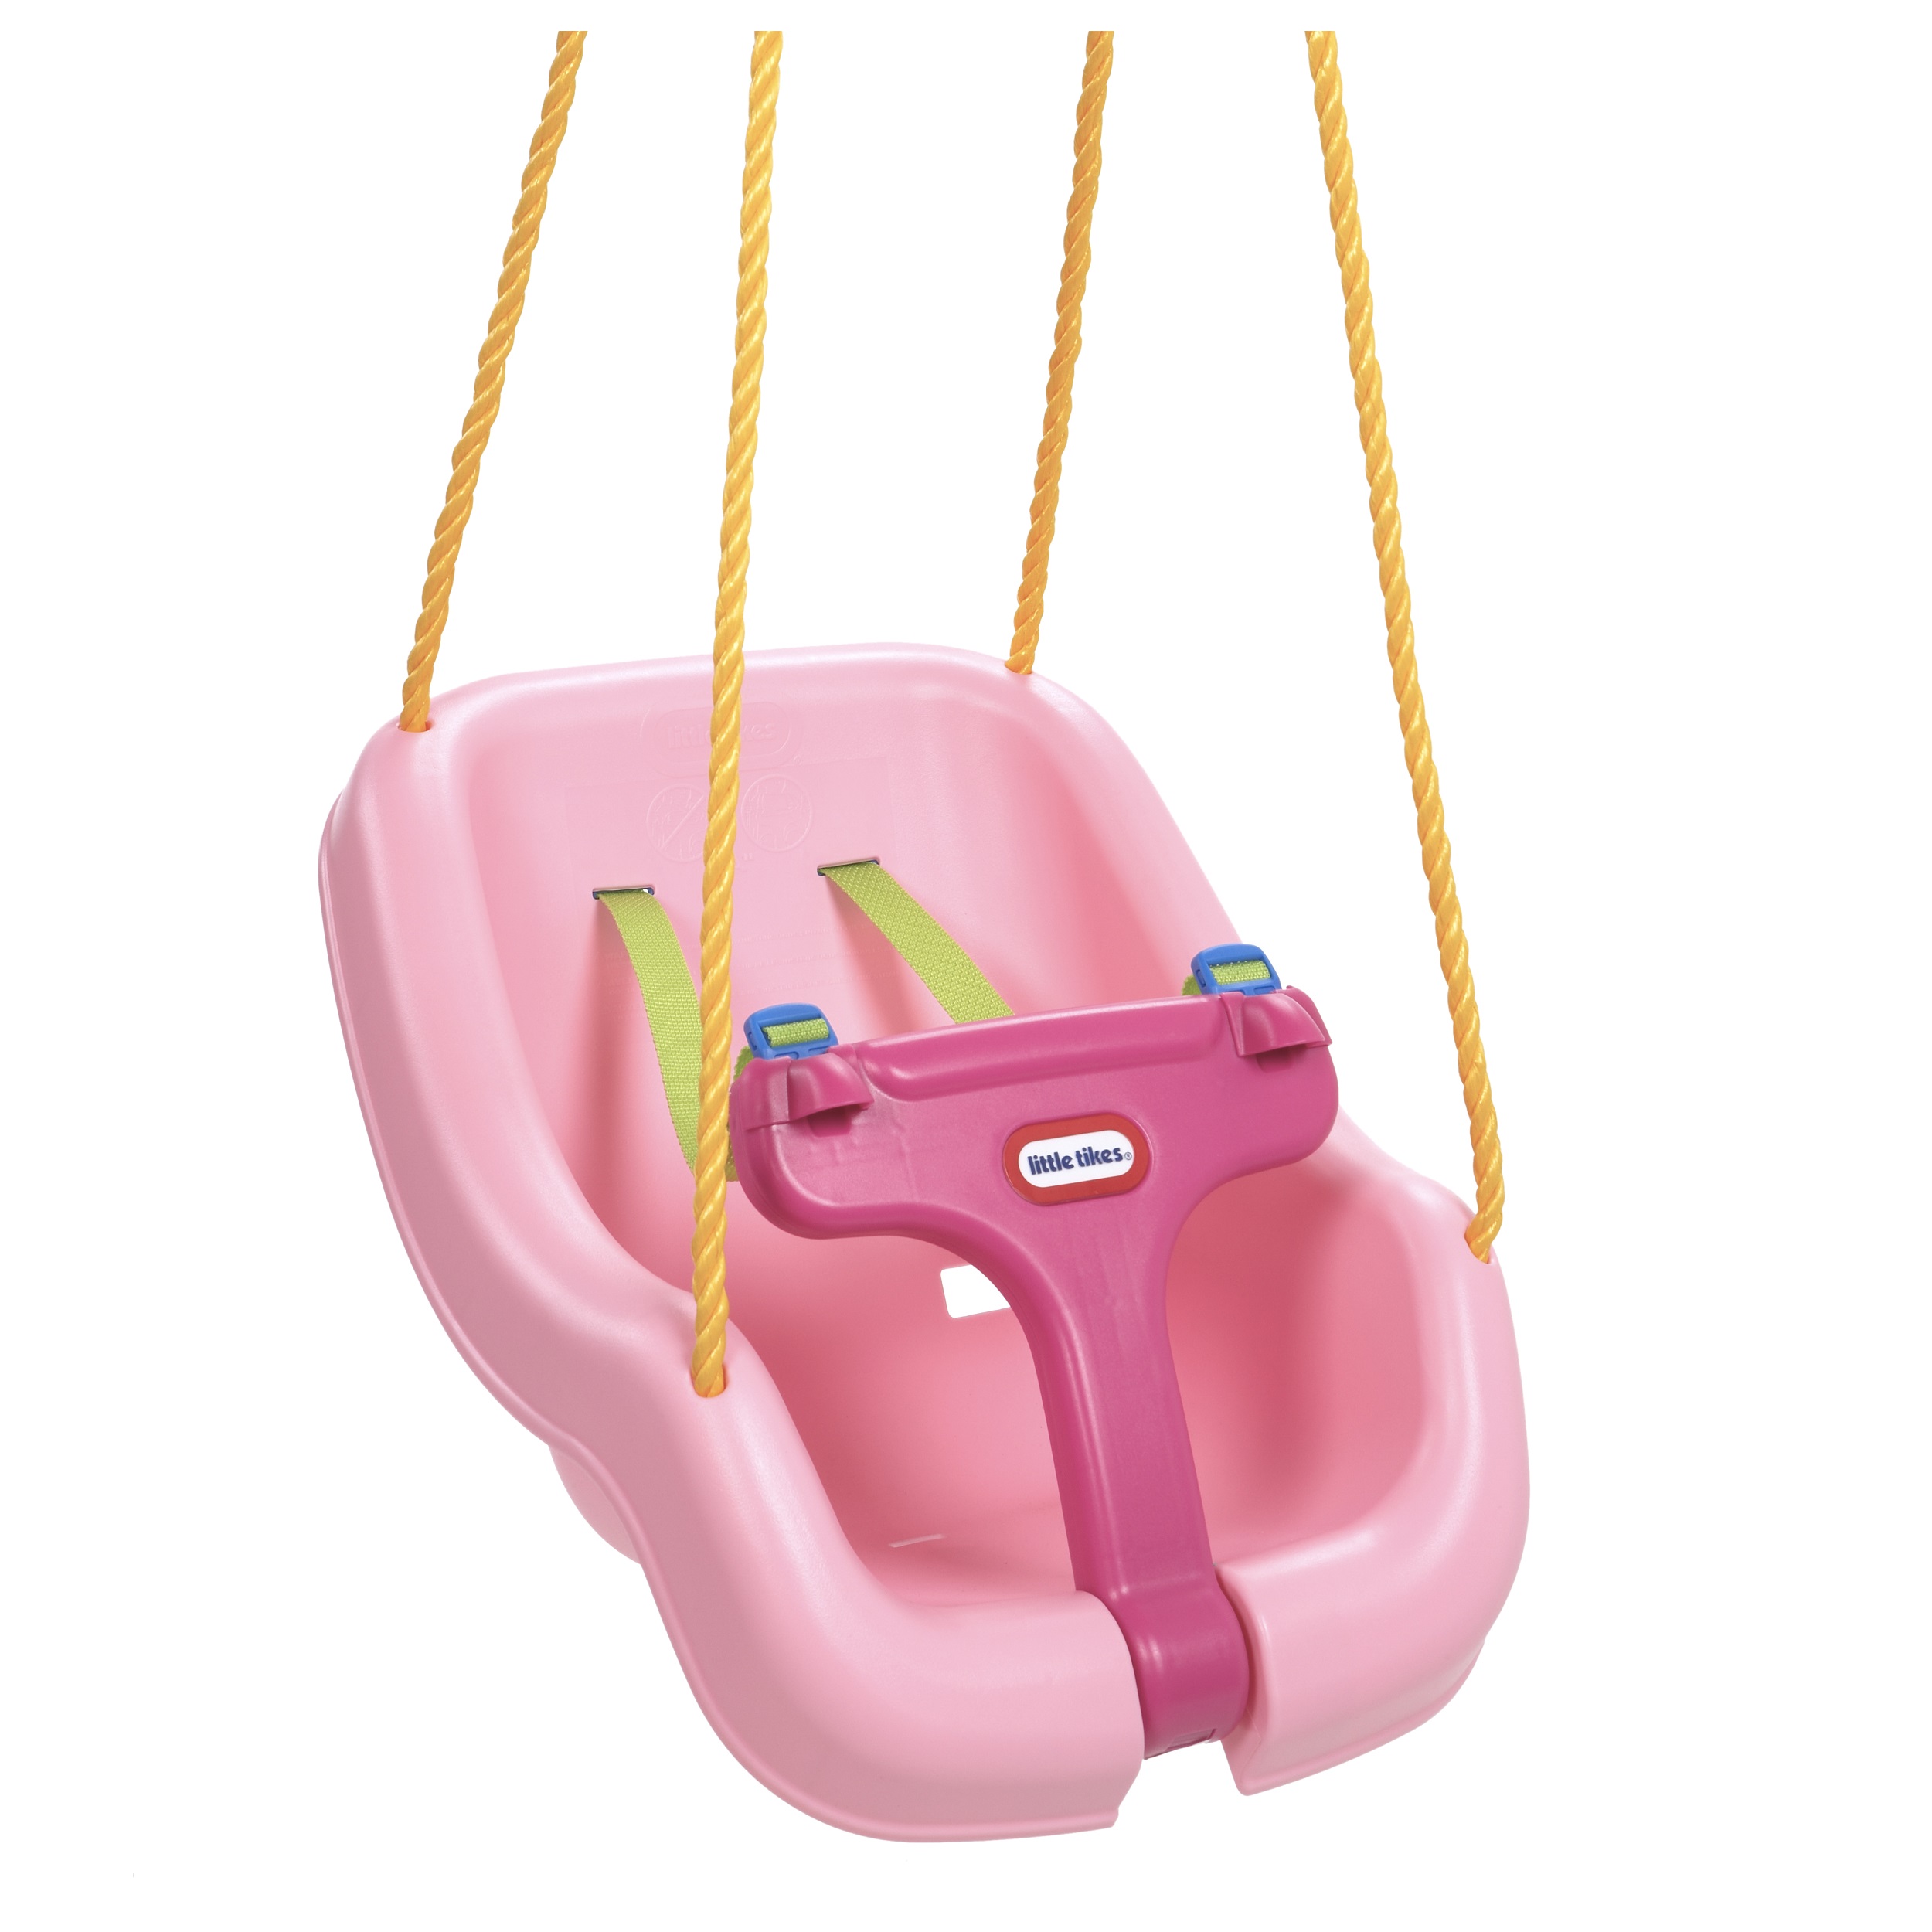 Little Tikes 2-in-1 Snug 'n Secure Swing with High Back and T-Bar, Pink- Infant Baby Toddler Swing, Outdoor Backyard Play Toy for Girls Boys Ages 9 months to 1 2 3 Years Old - image 3 of 9